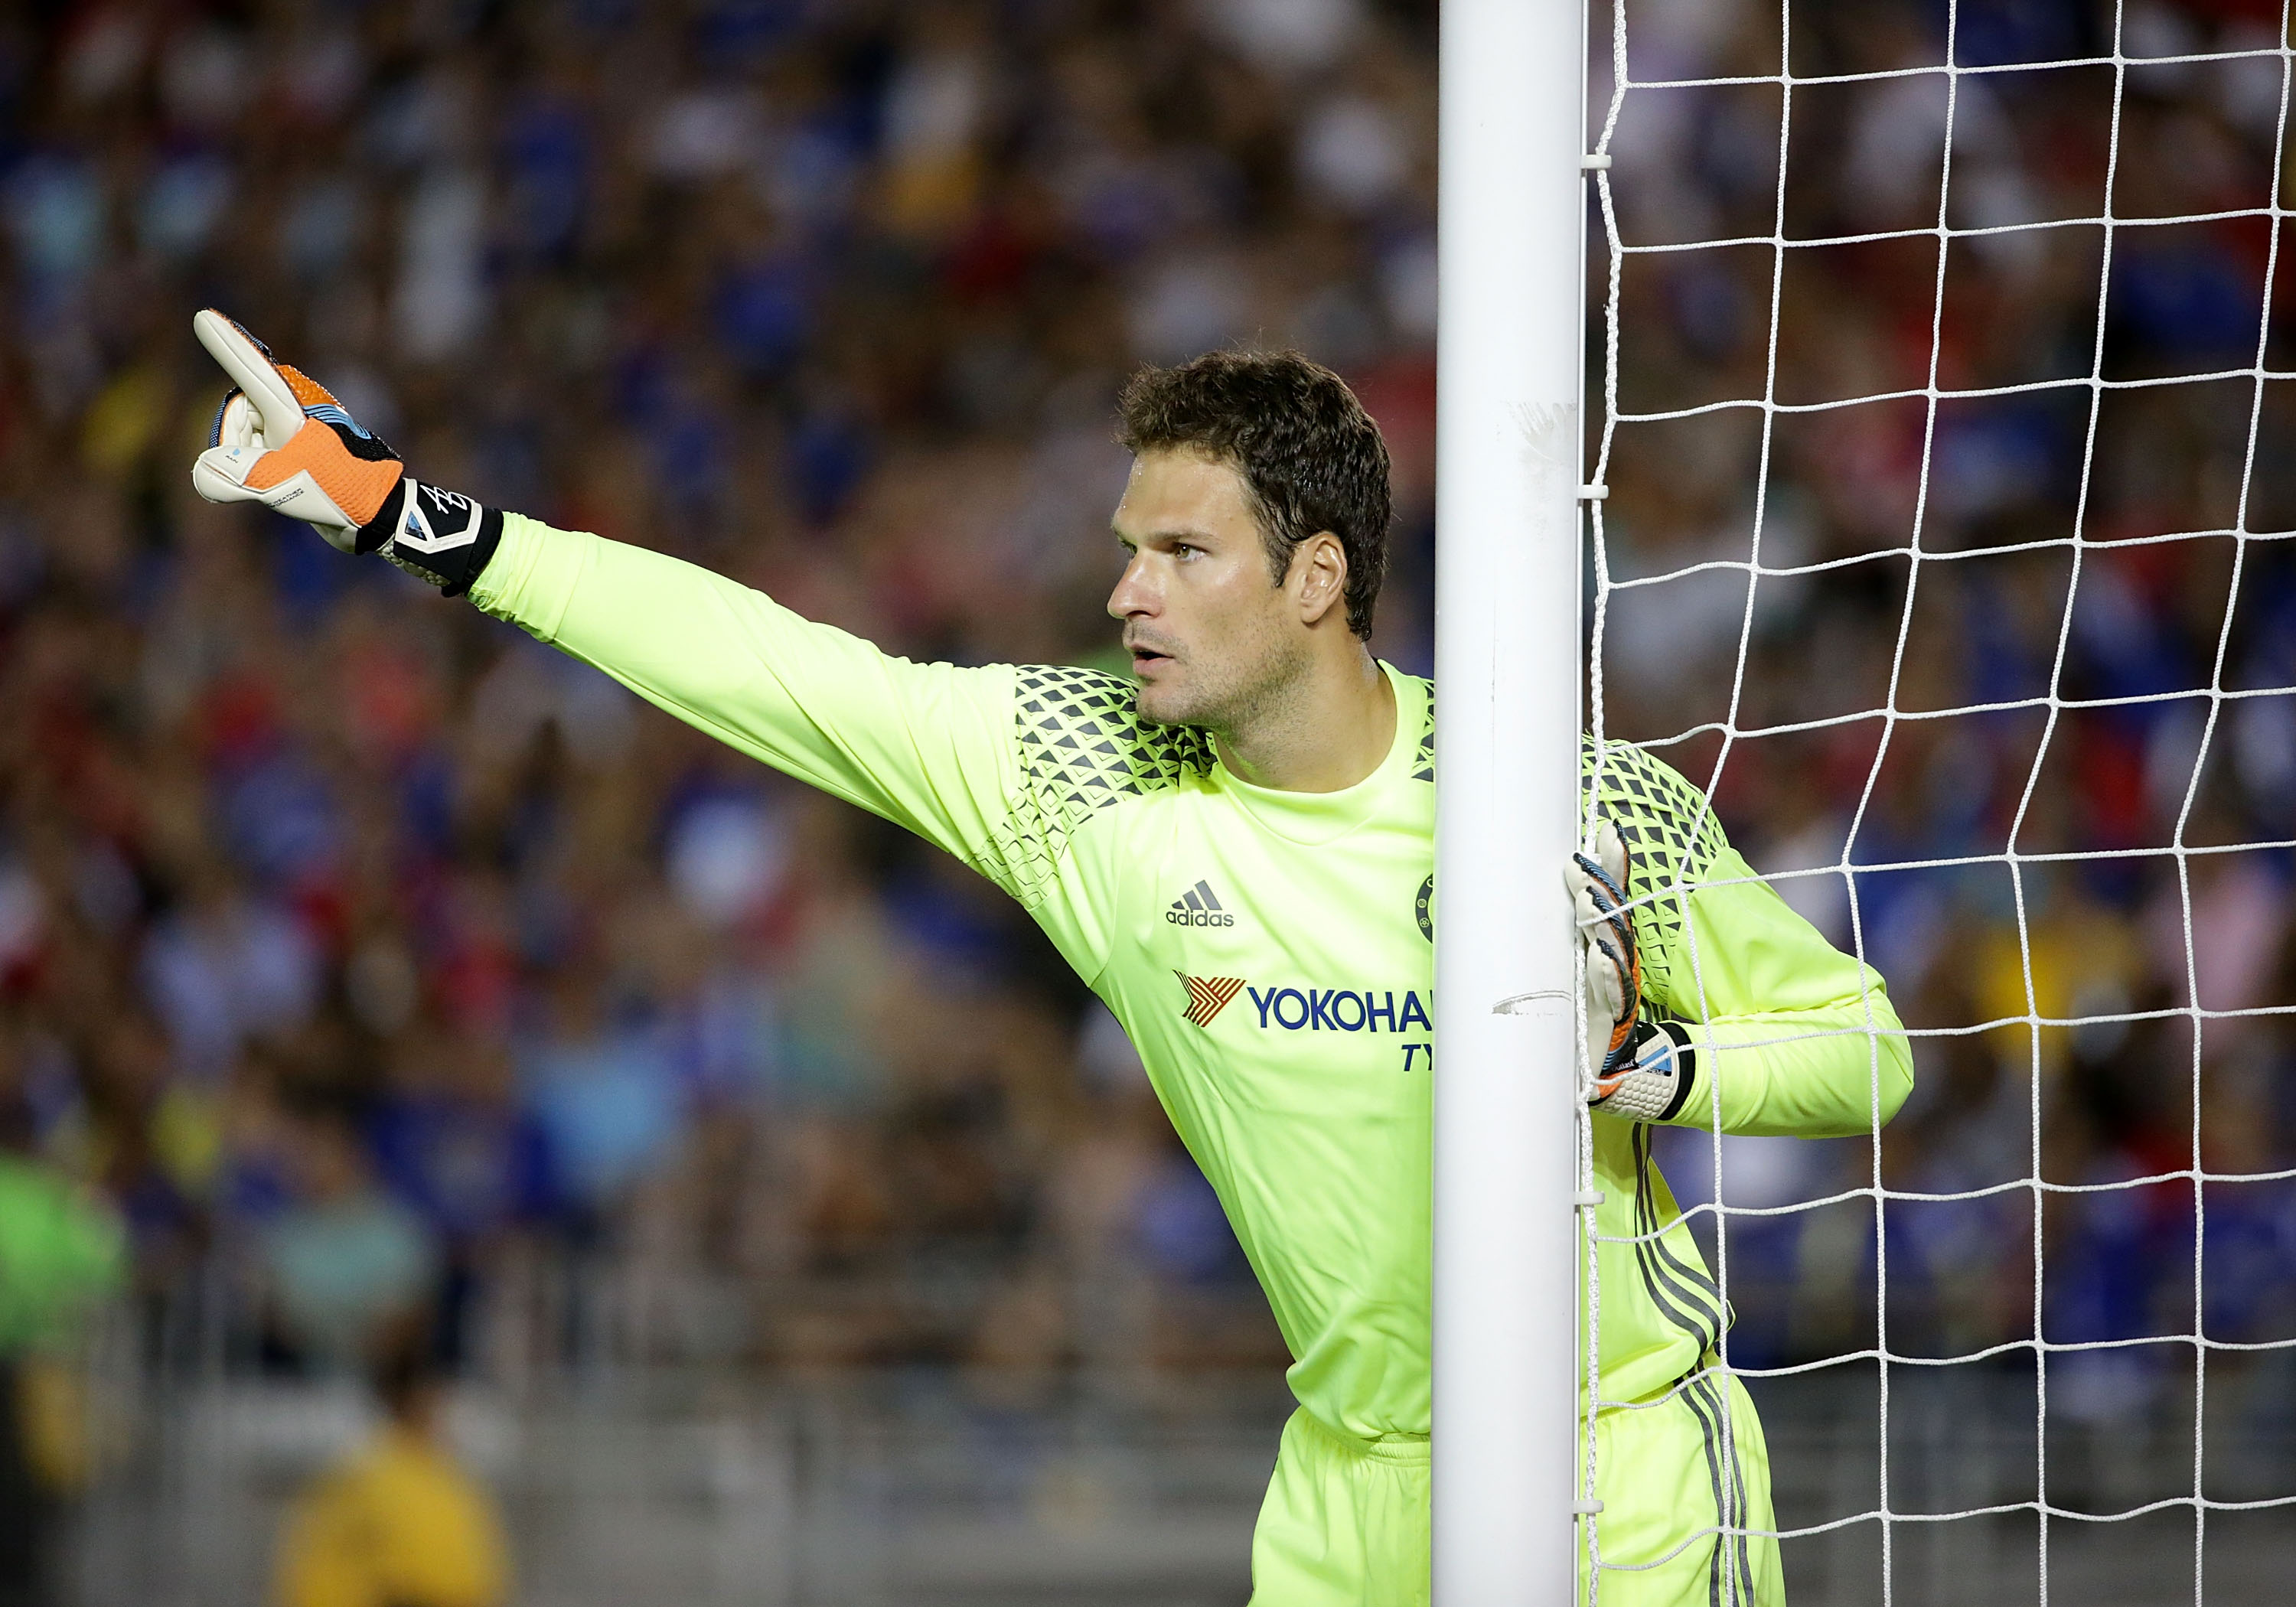 PASADENA, CA - JULY 27:  Goal keeper  Asmir Begovic #1 of Chelsea in action against Liverpool during the 2016 International Champions Cup at Rose Bowl on July 27, 2016 in Pasadena, California.  (Photo by Jeff Gross/Getty Images)